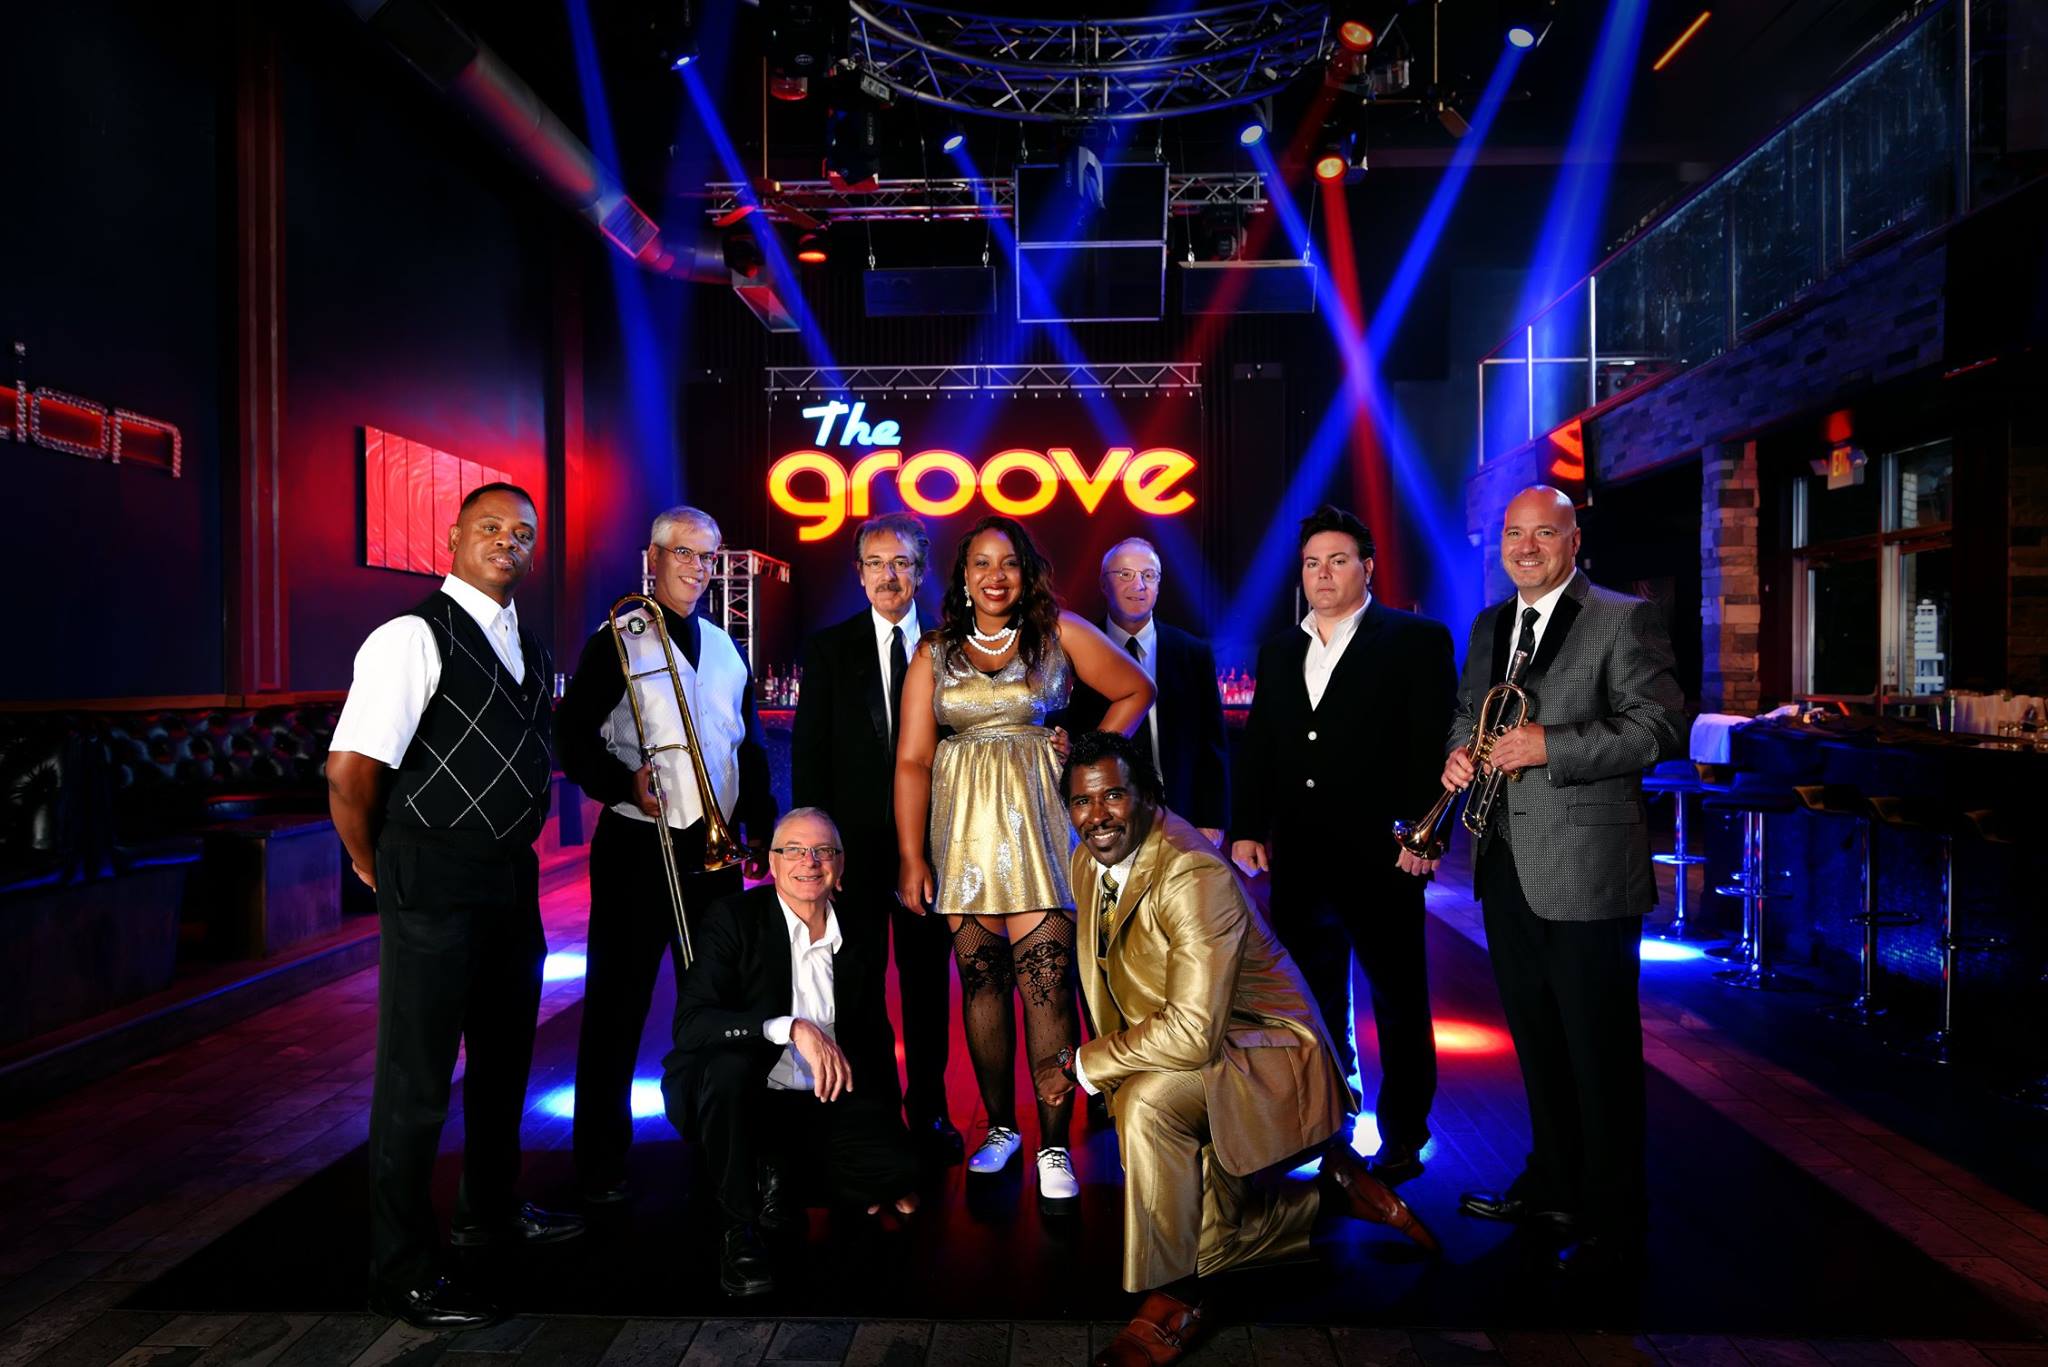 The Groove – It's all about The Groove!